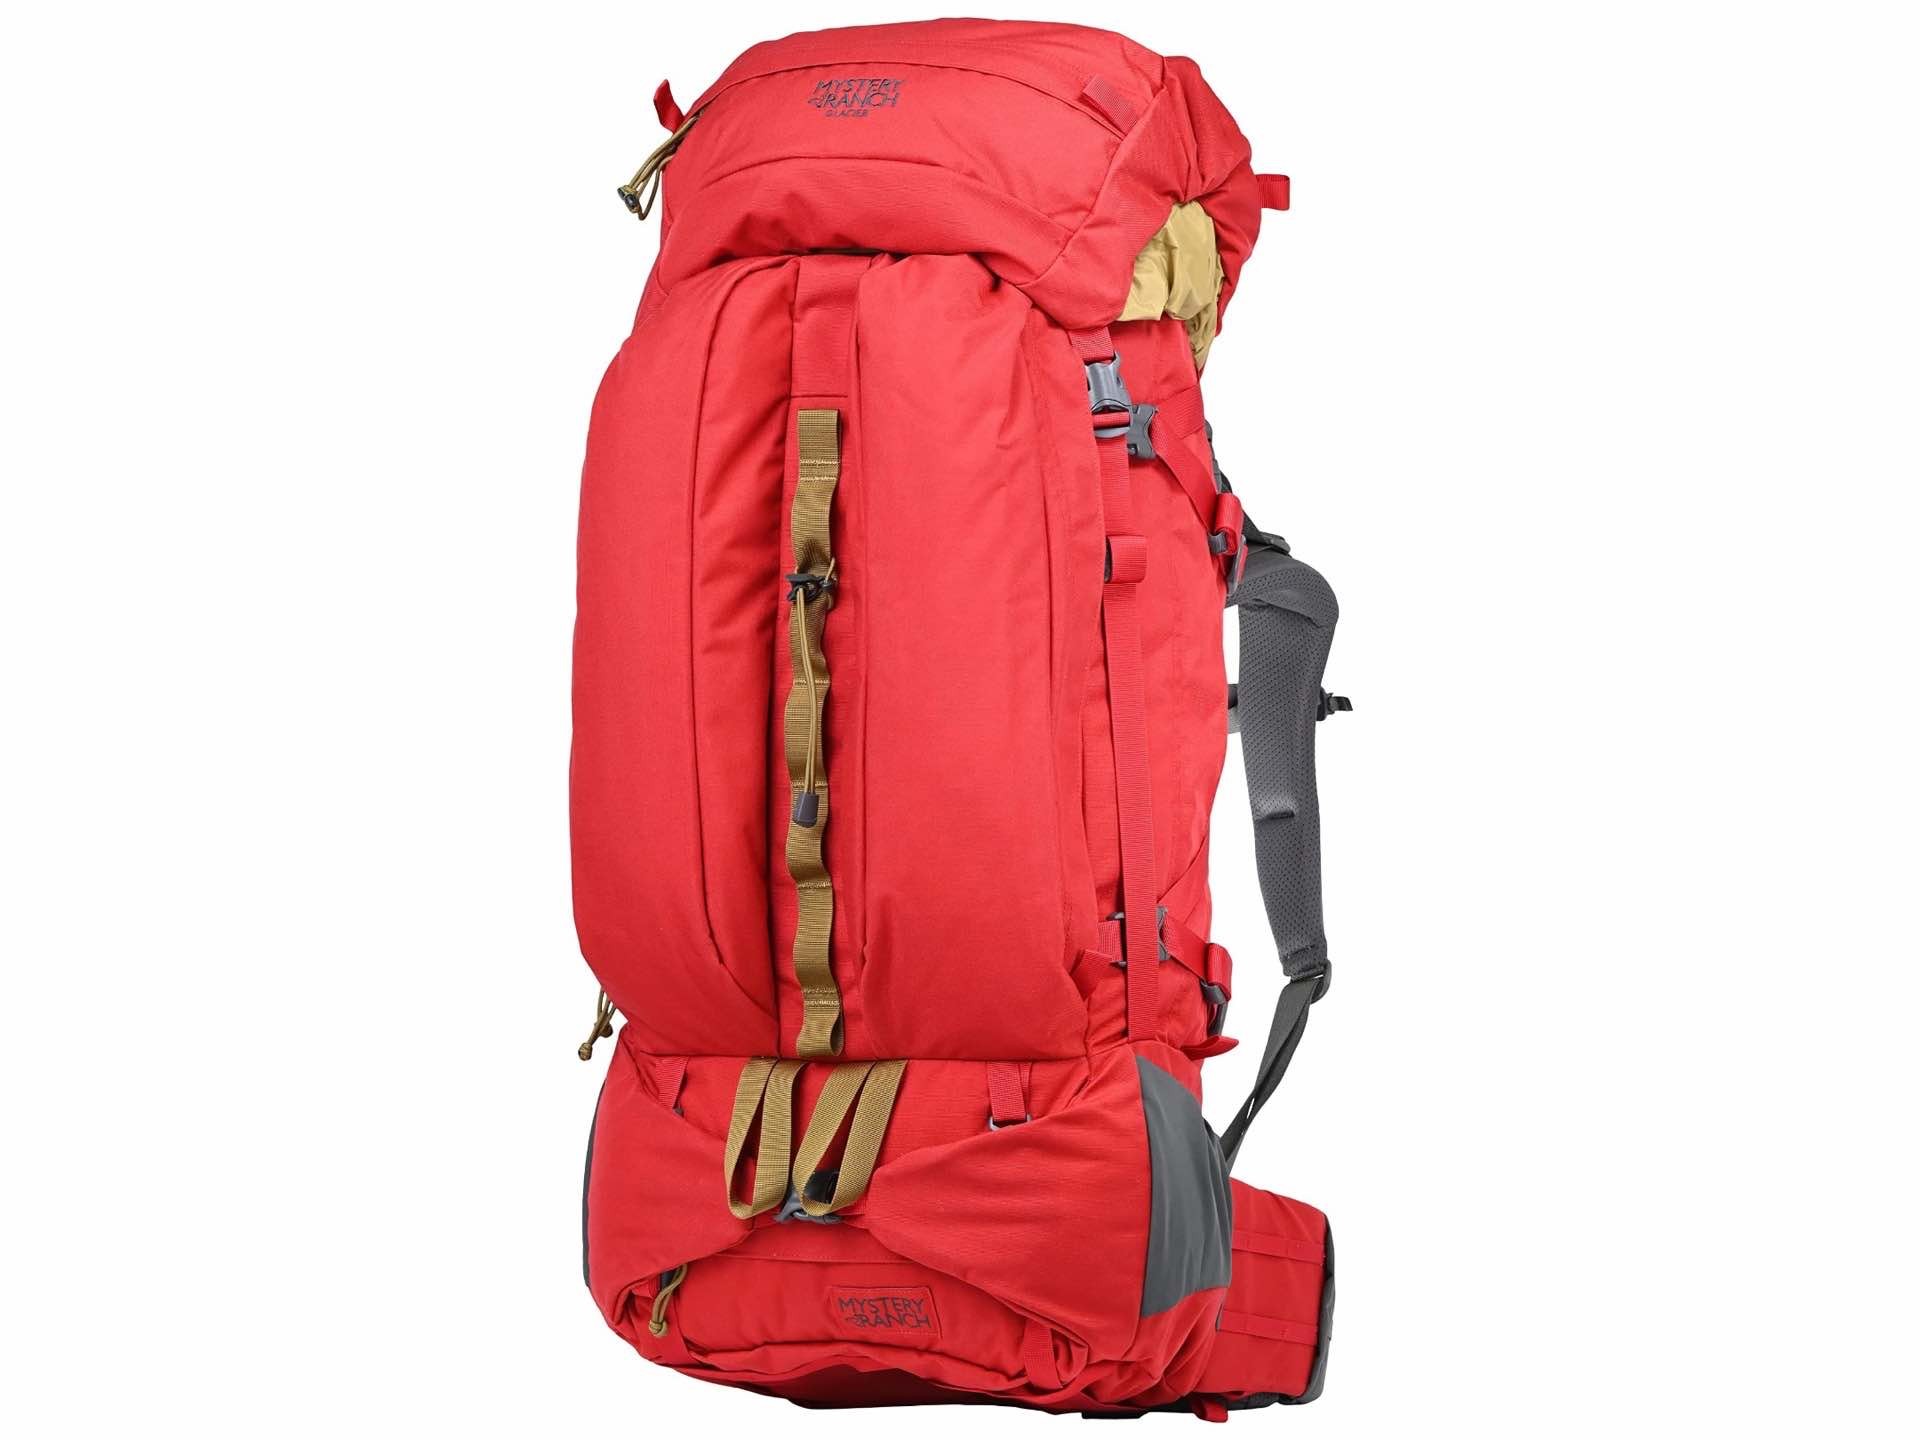 Mystery Ranch Glacier hiking backpack. ($375 for all sizes/colors)